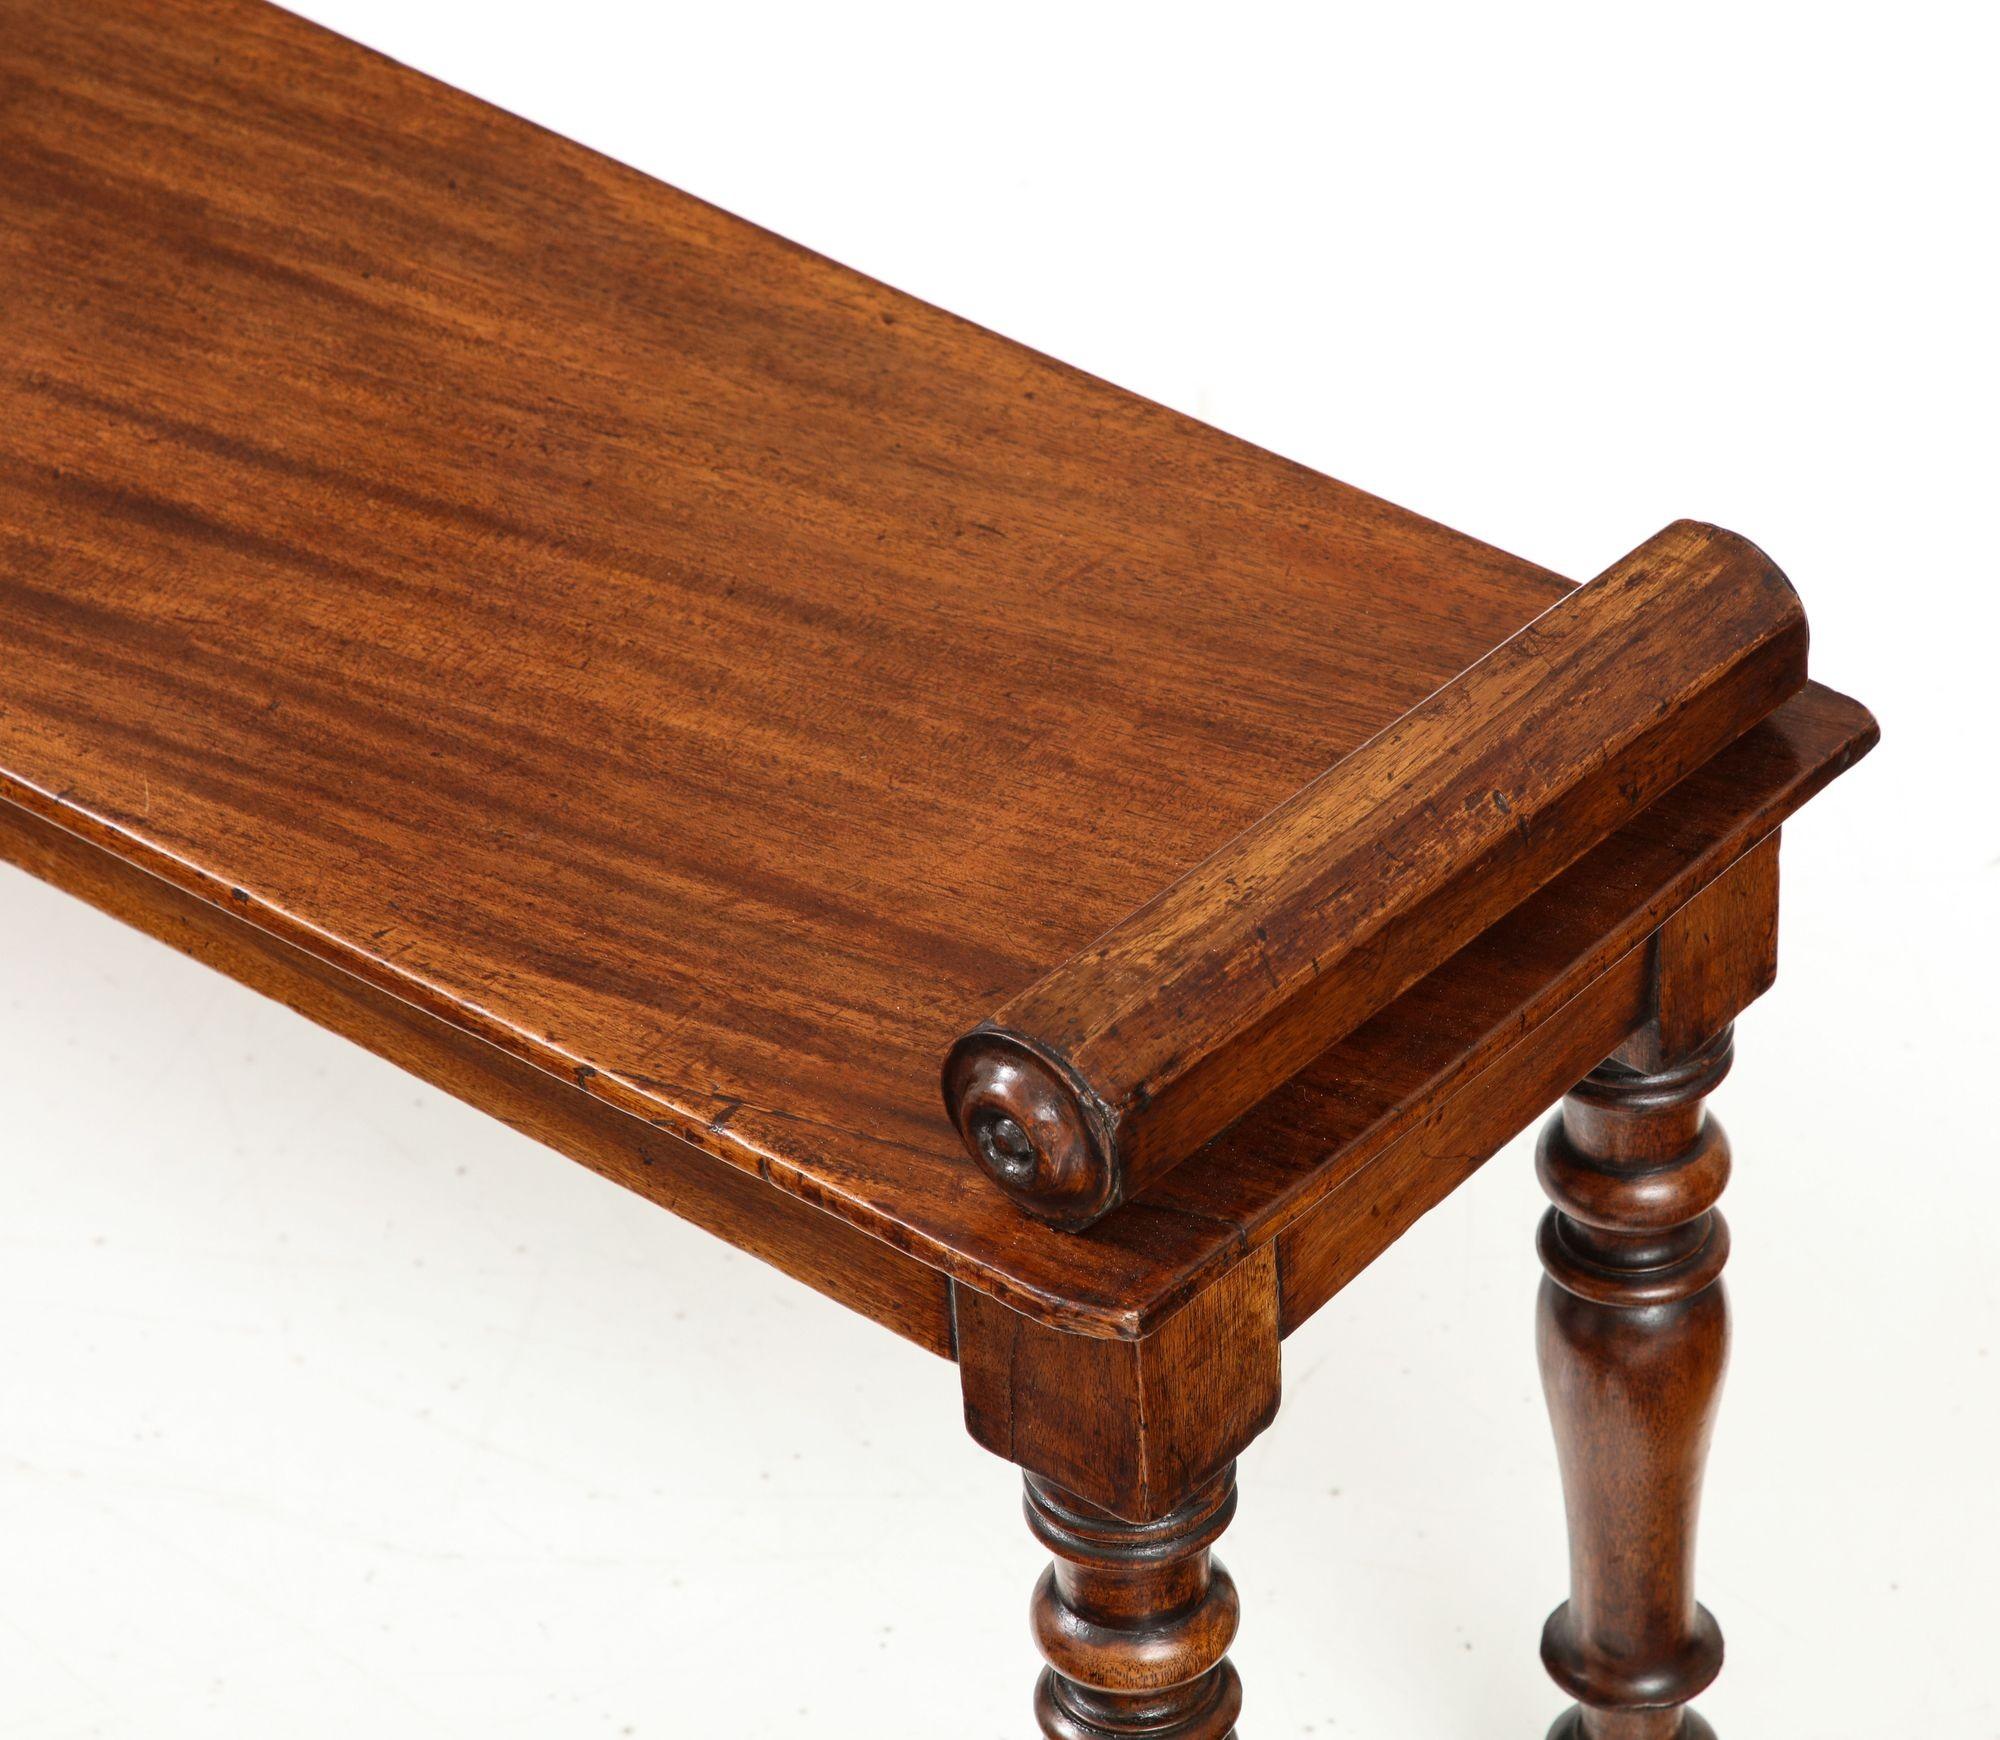 English Country House Hall Bench 15